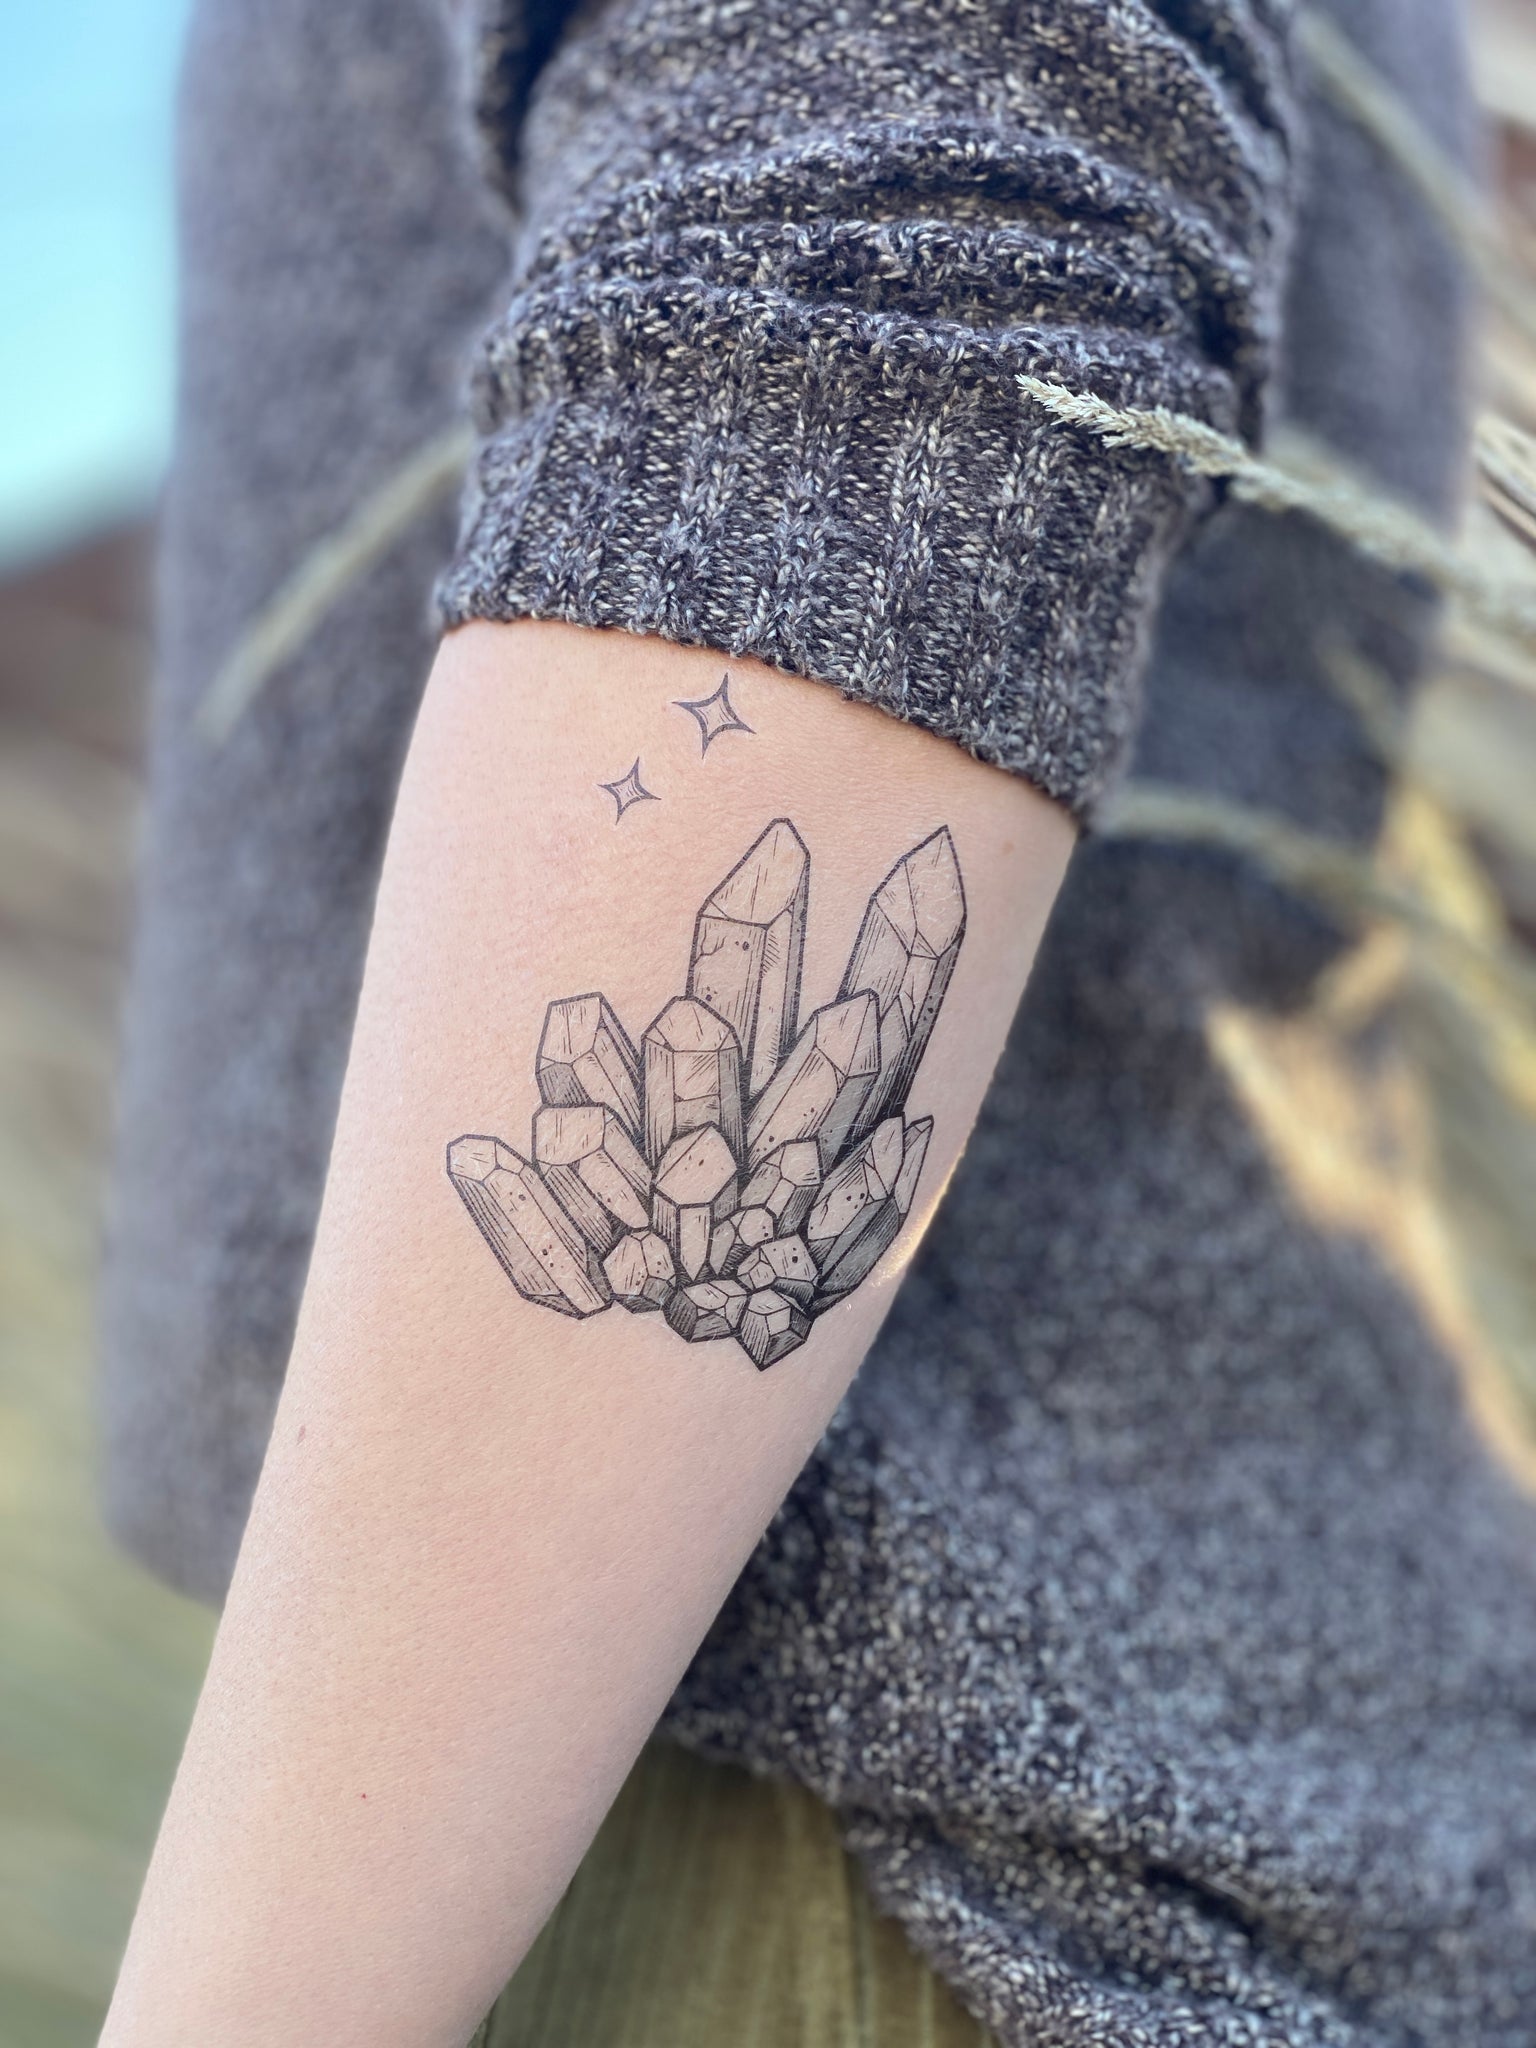 Get More Inspiration With 50 Minimalist Tattoo Ideas 2020  Page 44 of 57   tracesofmybody com